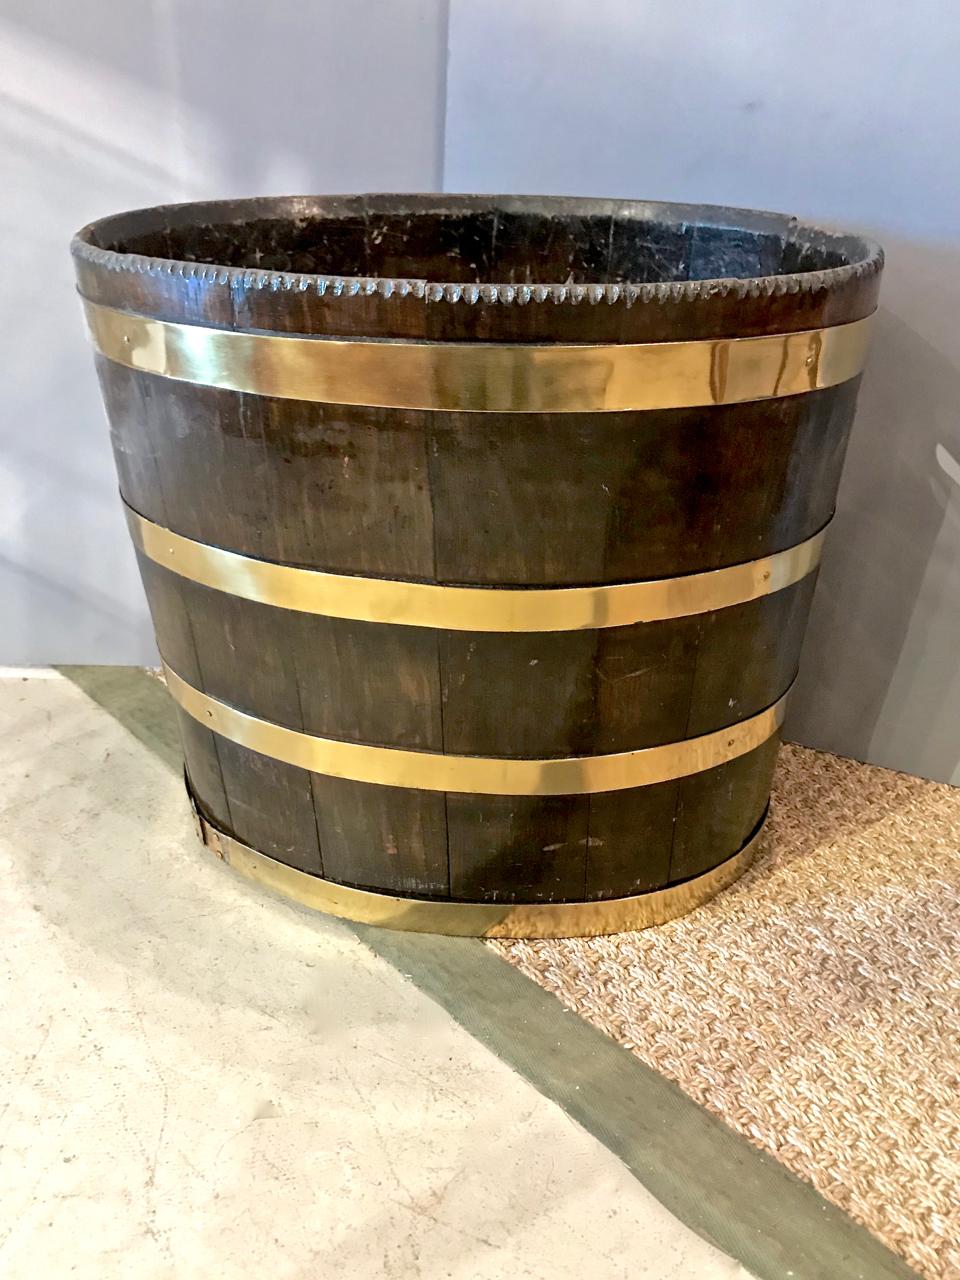 This is a very large English George III or Regency brass bound mahogany peat bucket. The bucket is in overall very good condition. The bucket features side open finger holds; tin liner is a replacement, but appropriate. The brass banding has